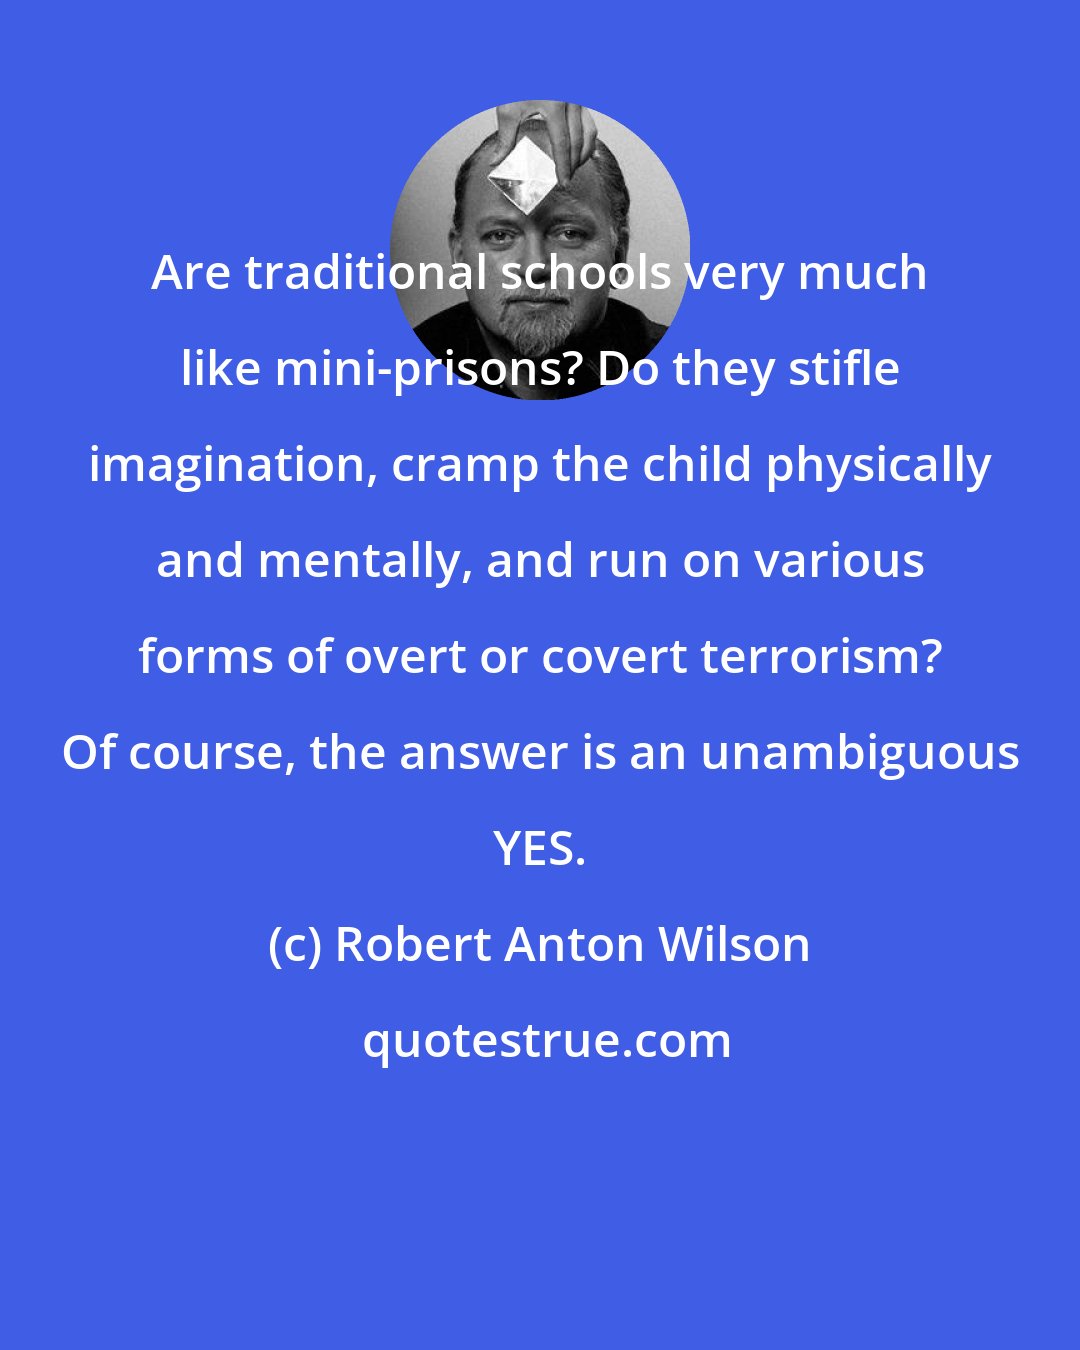 Robert Anton Wilson: Are traditional schools very much like mini-prisons? Do they stifle imagination, cramp the child physically and mentally, and run on various forms of overt or covert terrorism? Of course, the answer is an unambiguous YES.